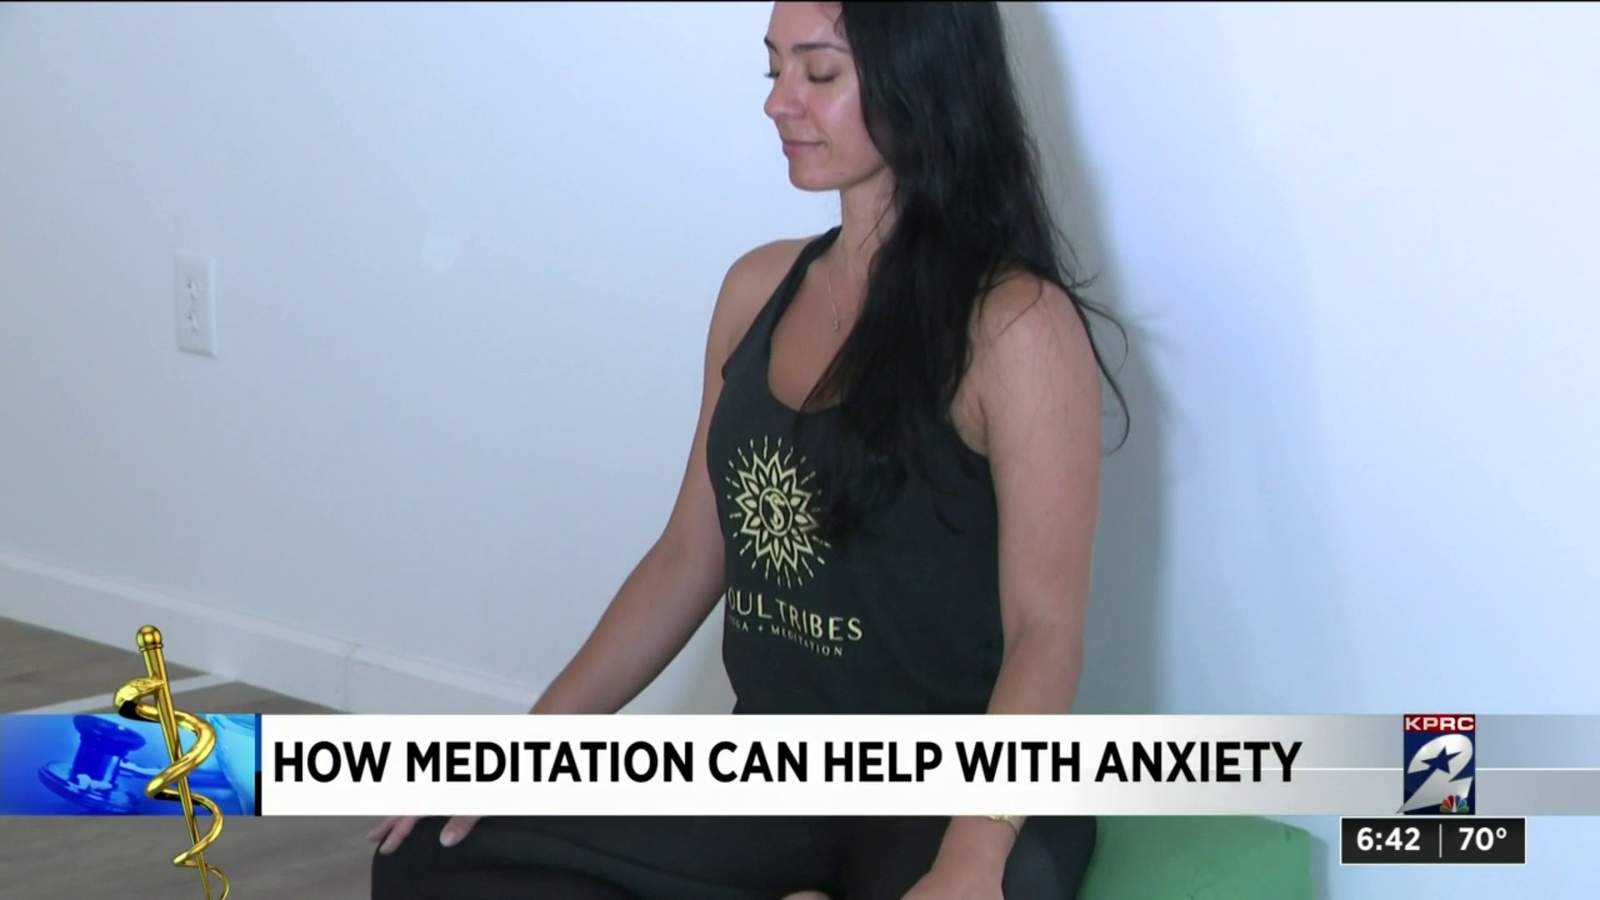 How to begin meditation and why it could prevent mental health suffering during the pandemic